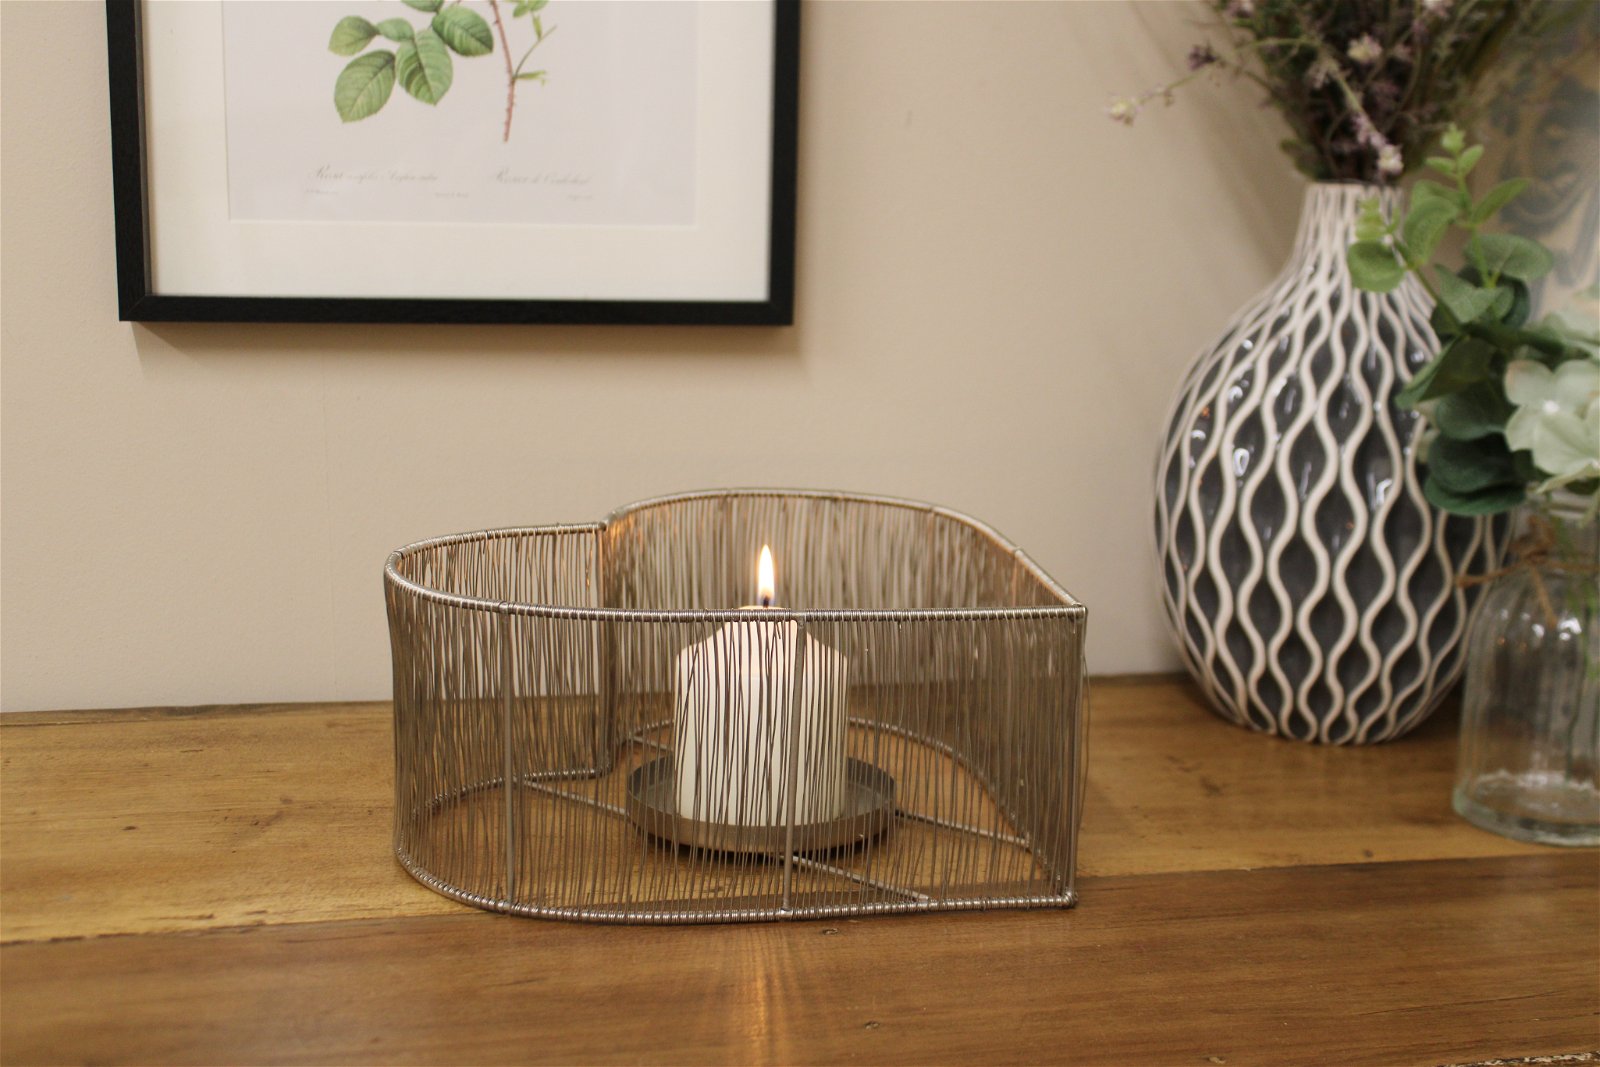 Silver Heart Candle Holder - a Cheeky Plant